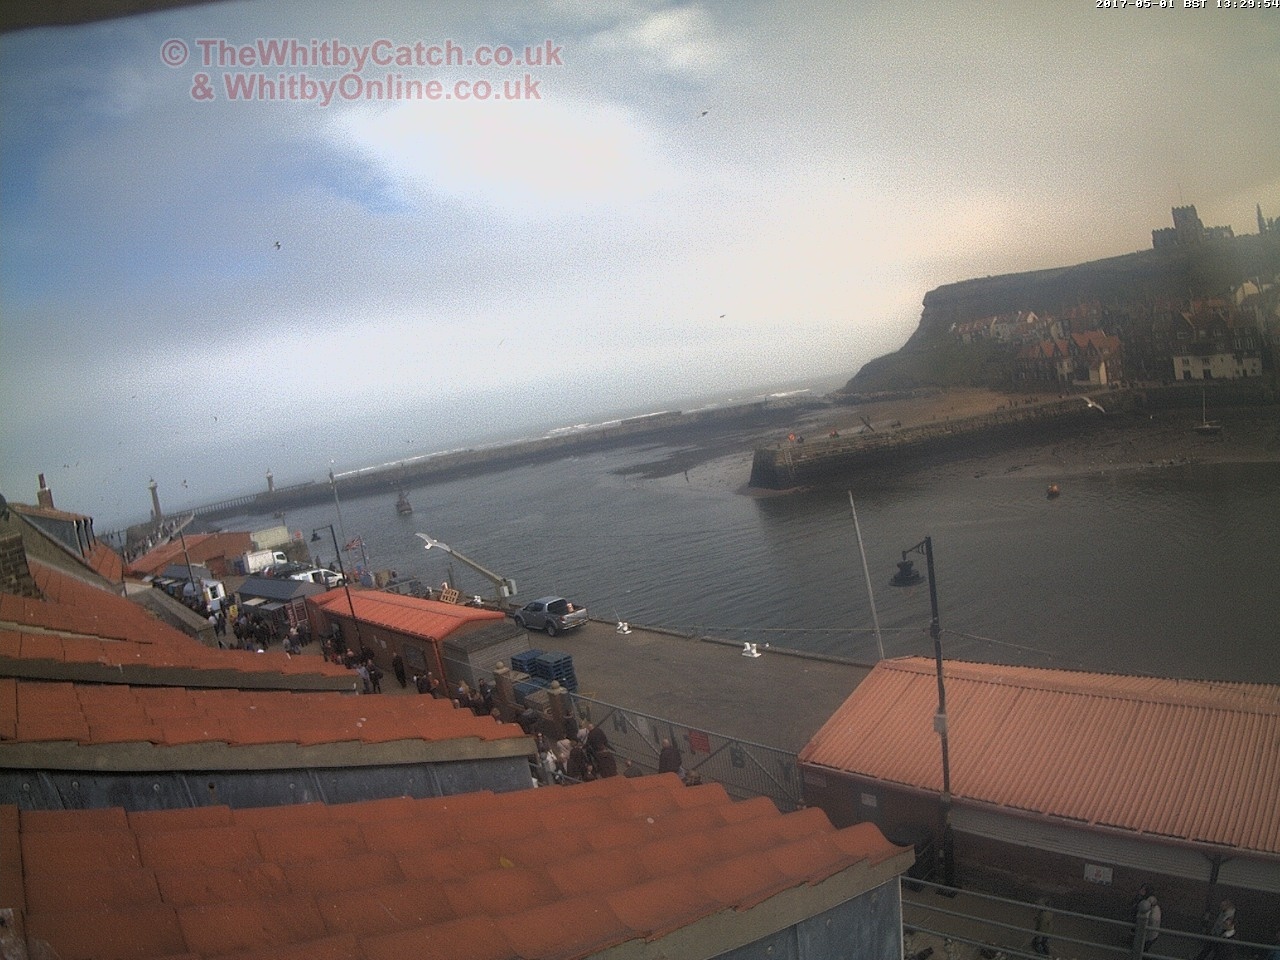 Whitby Mon 1st May 2017 13:30.